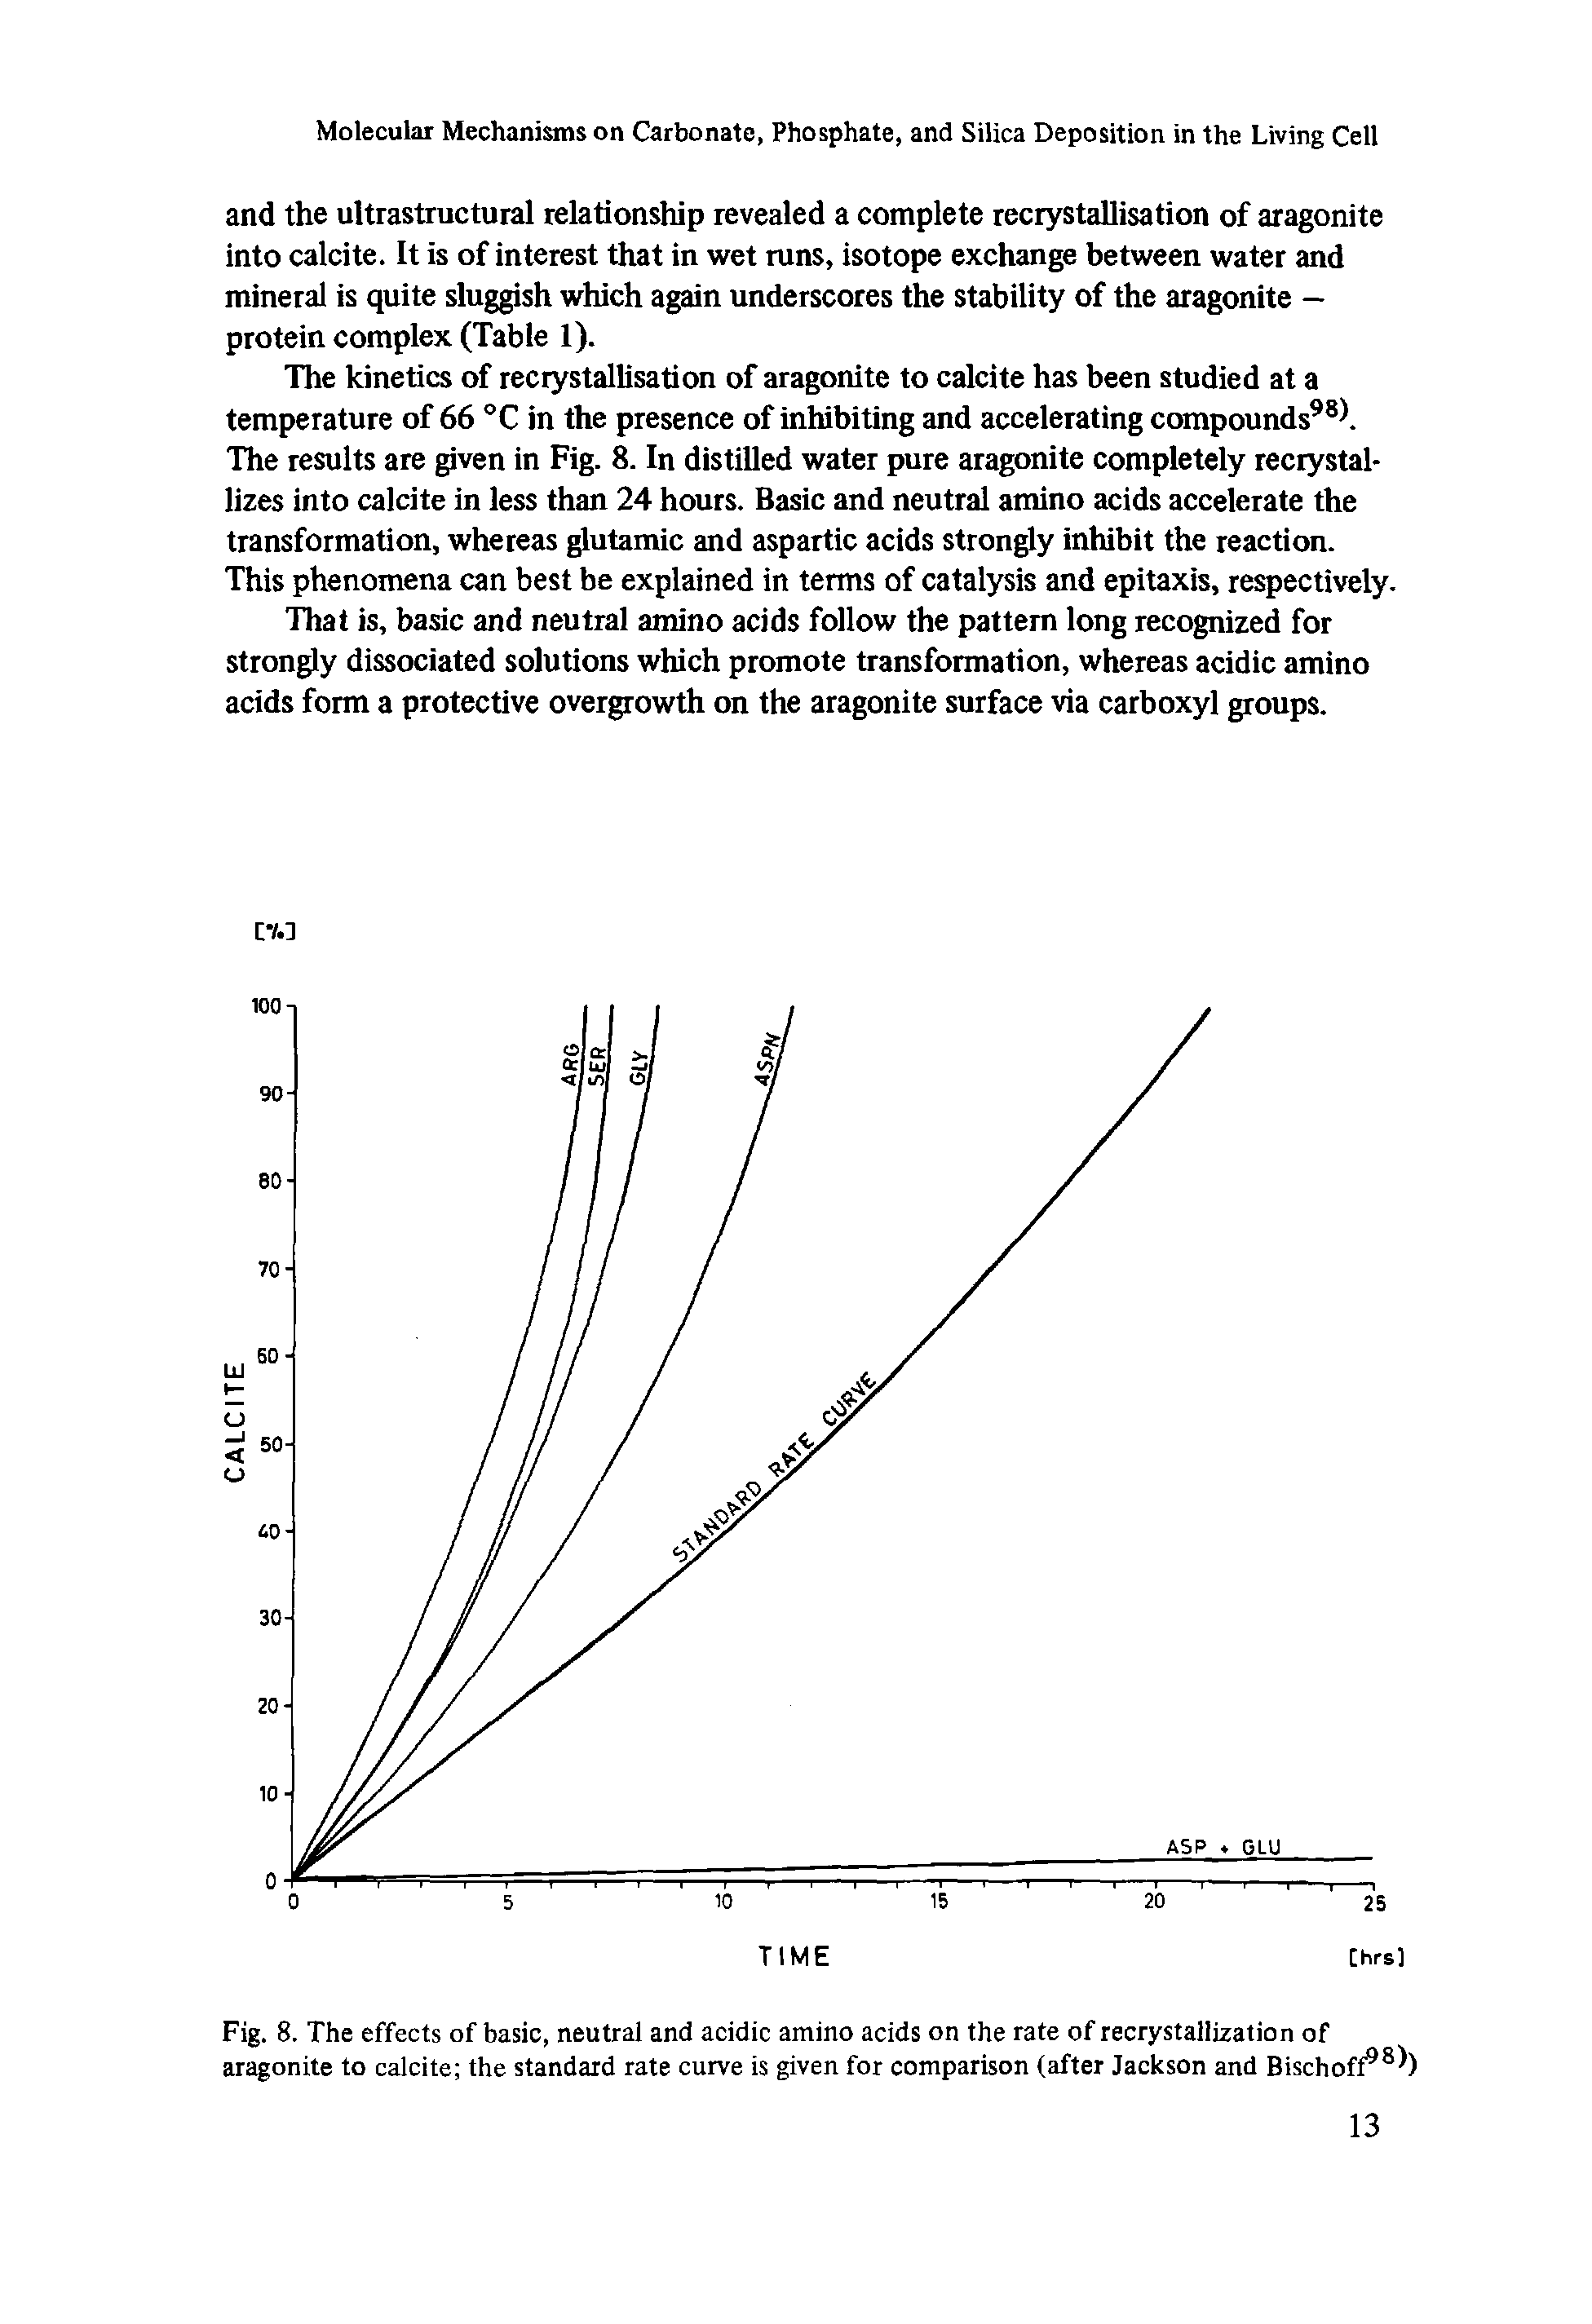 Fig. 8. The effects of basic, neutral and acidic amino acids on the rate of recrystallization of aragonite to calcite the standard rate curve is given for comparison (after Jackson and Bischoff98 )...